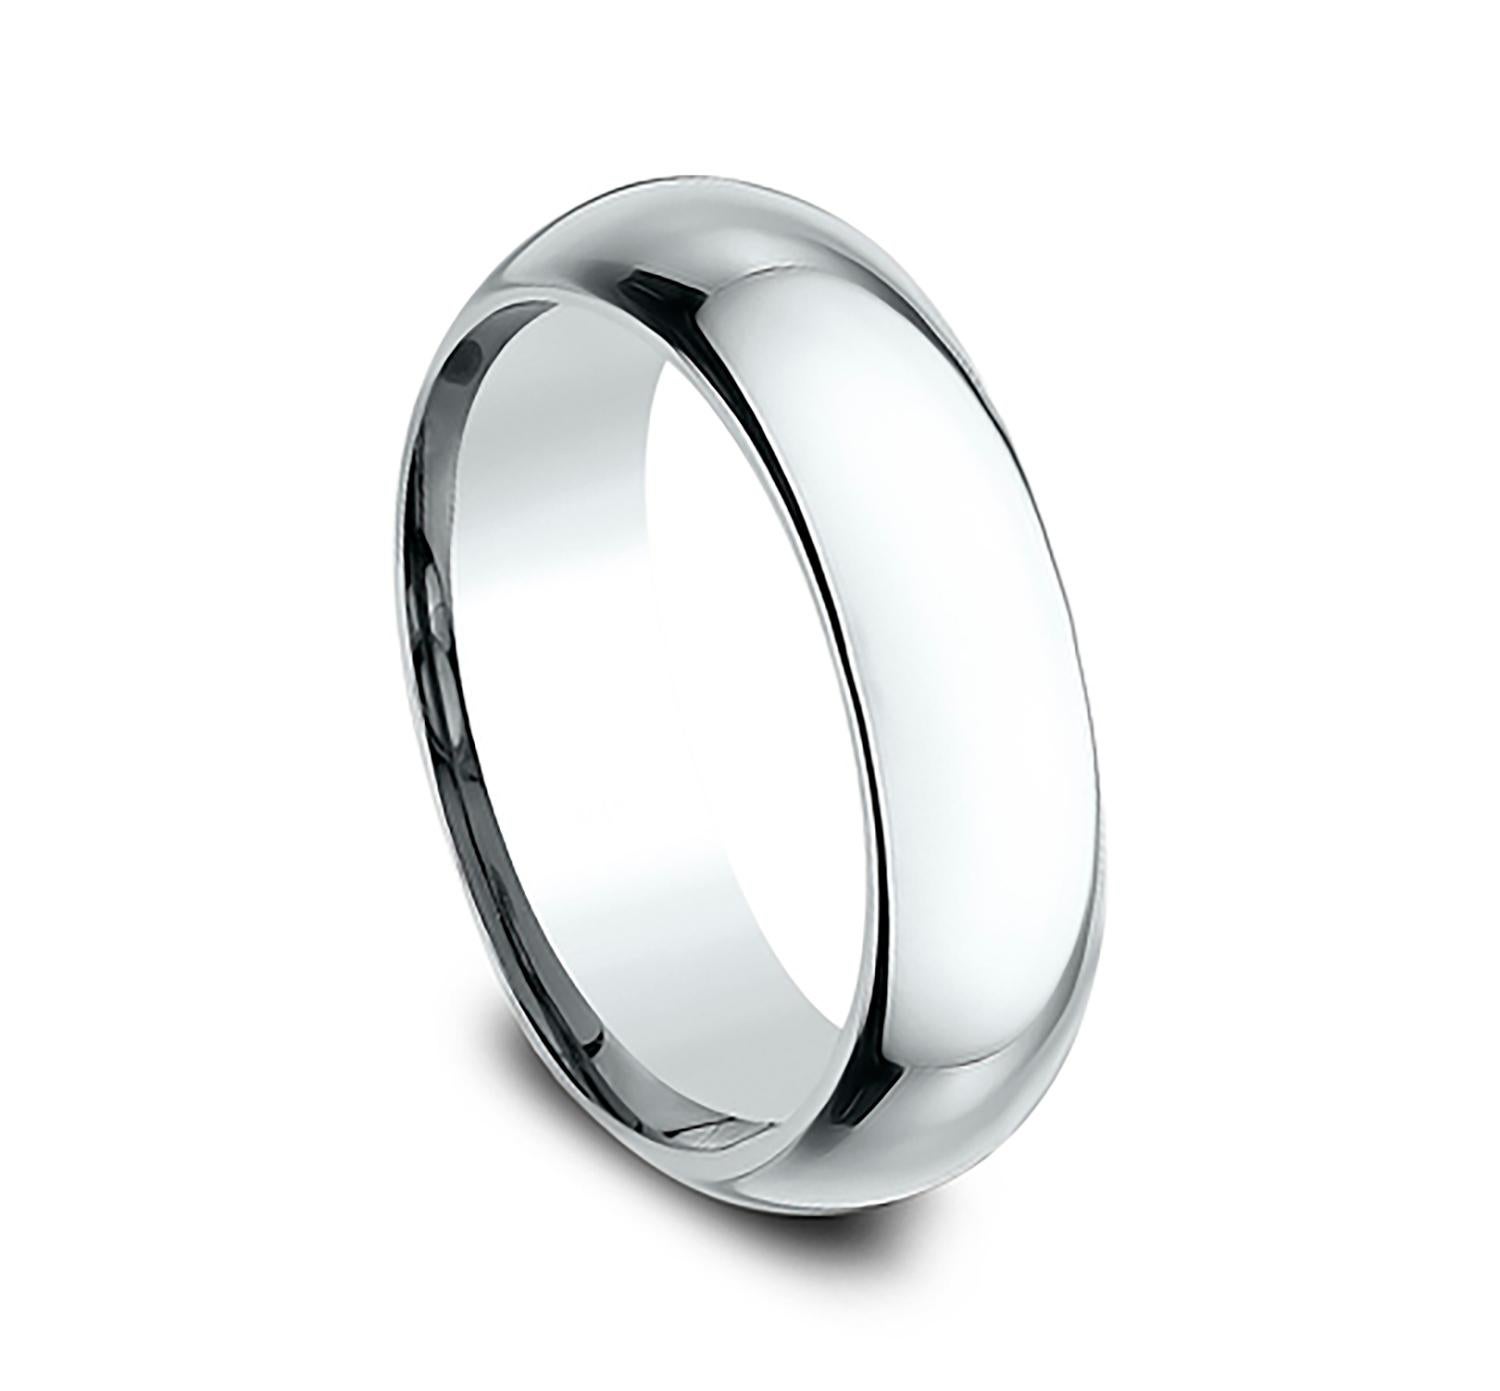 Benchmark wedding band in 14K white gold polished finish. Width 6mm, high dome comfort fit. Custom engraving and finishing available. Size 10 US and resizable upon request. Available in 1/4, 1/2, and 3/4 sizes, for more information please message us